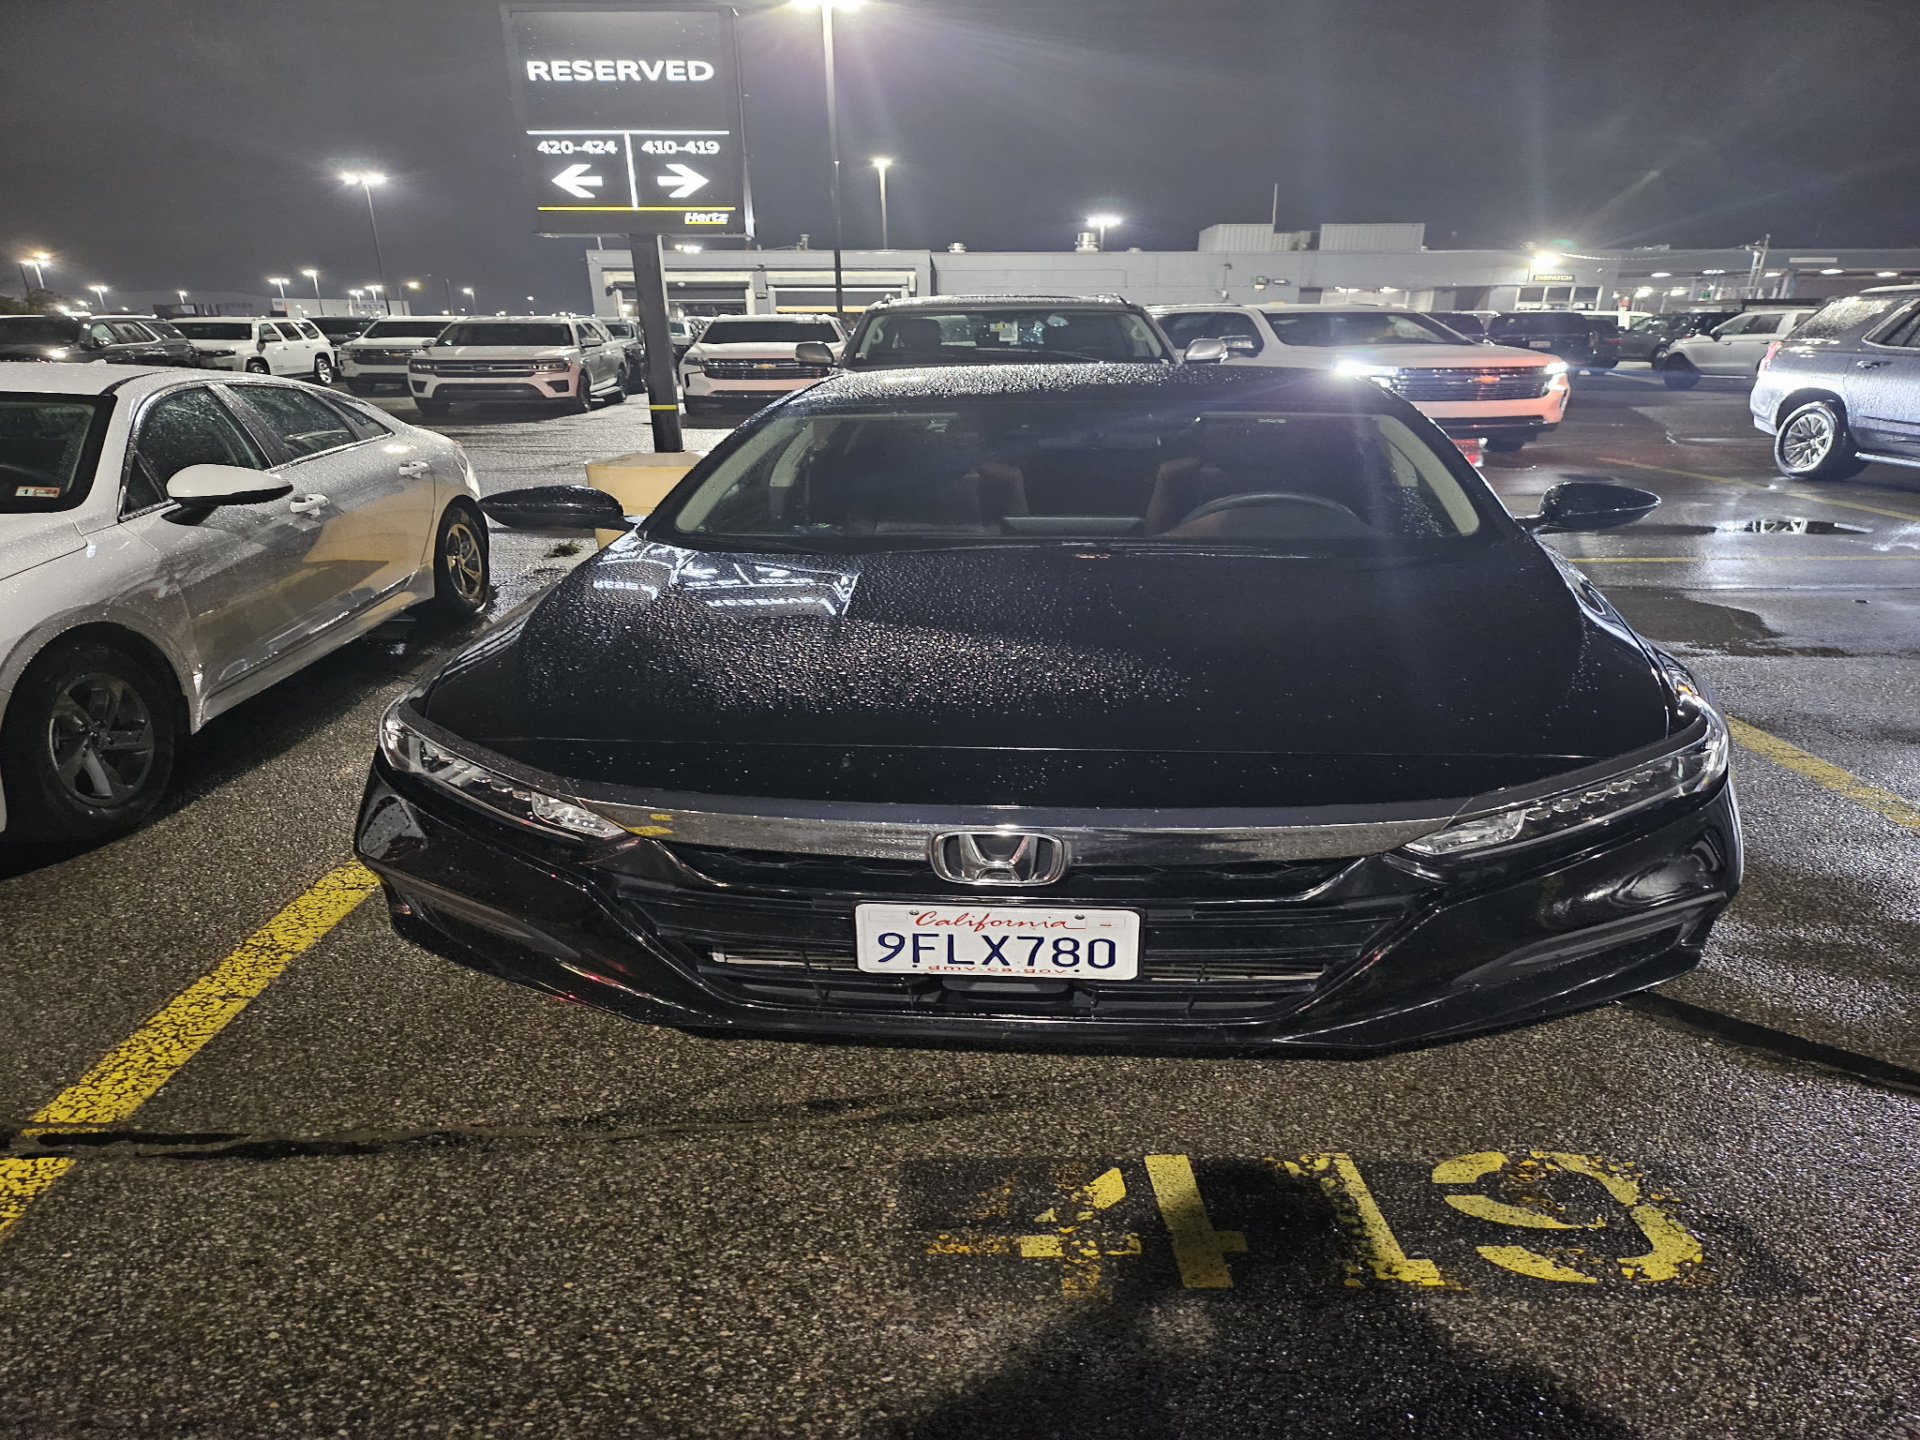 a black car parked in a parking lot